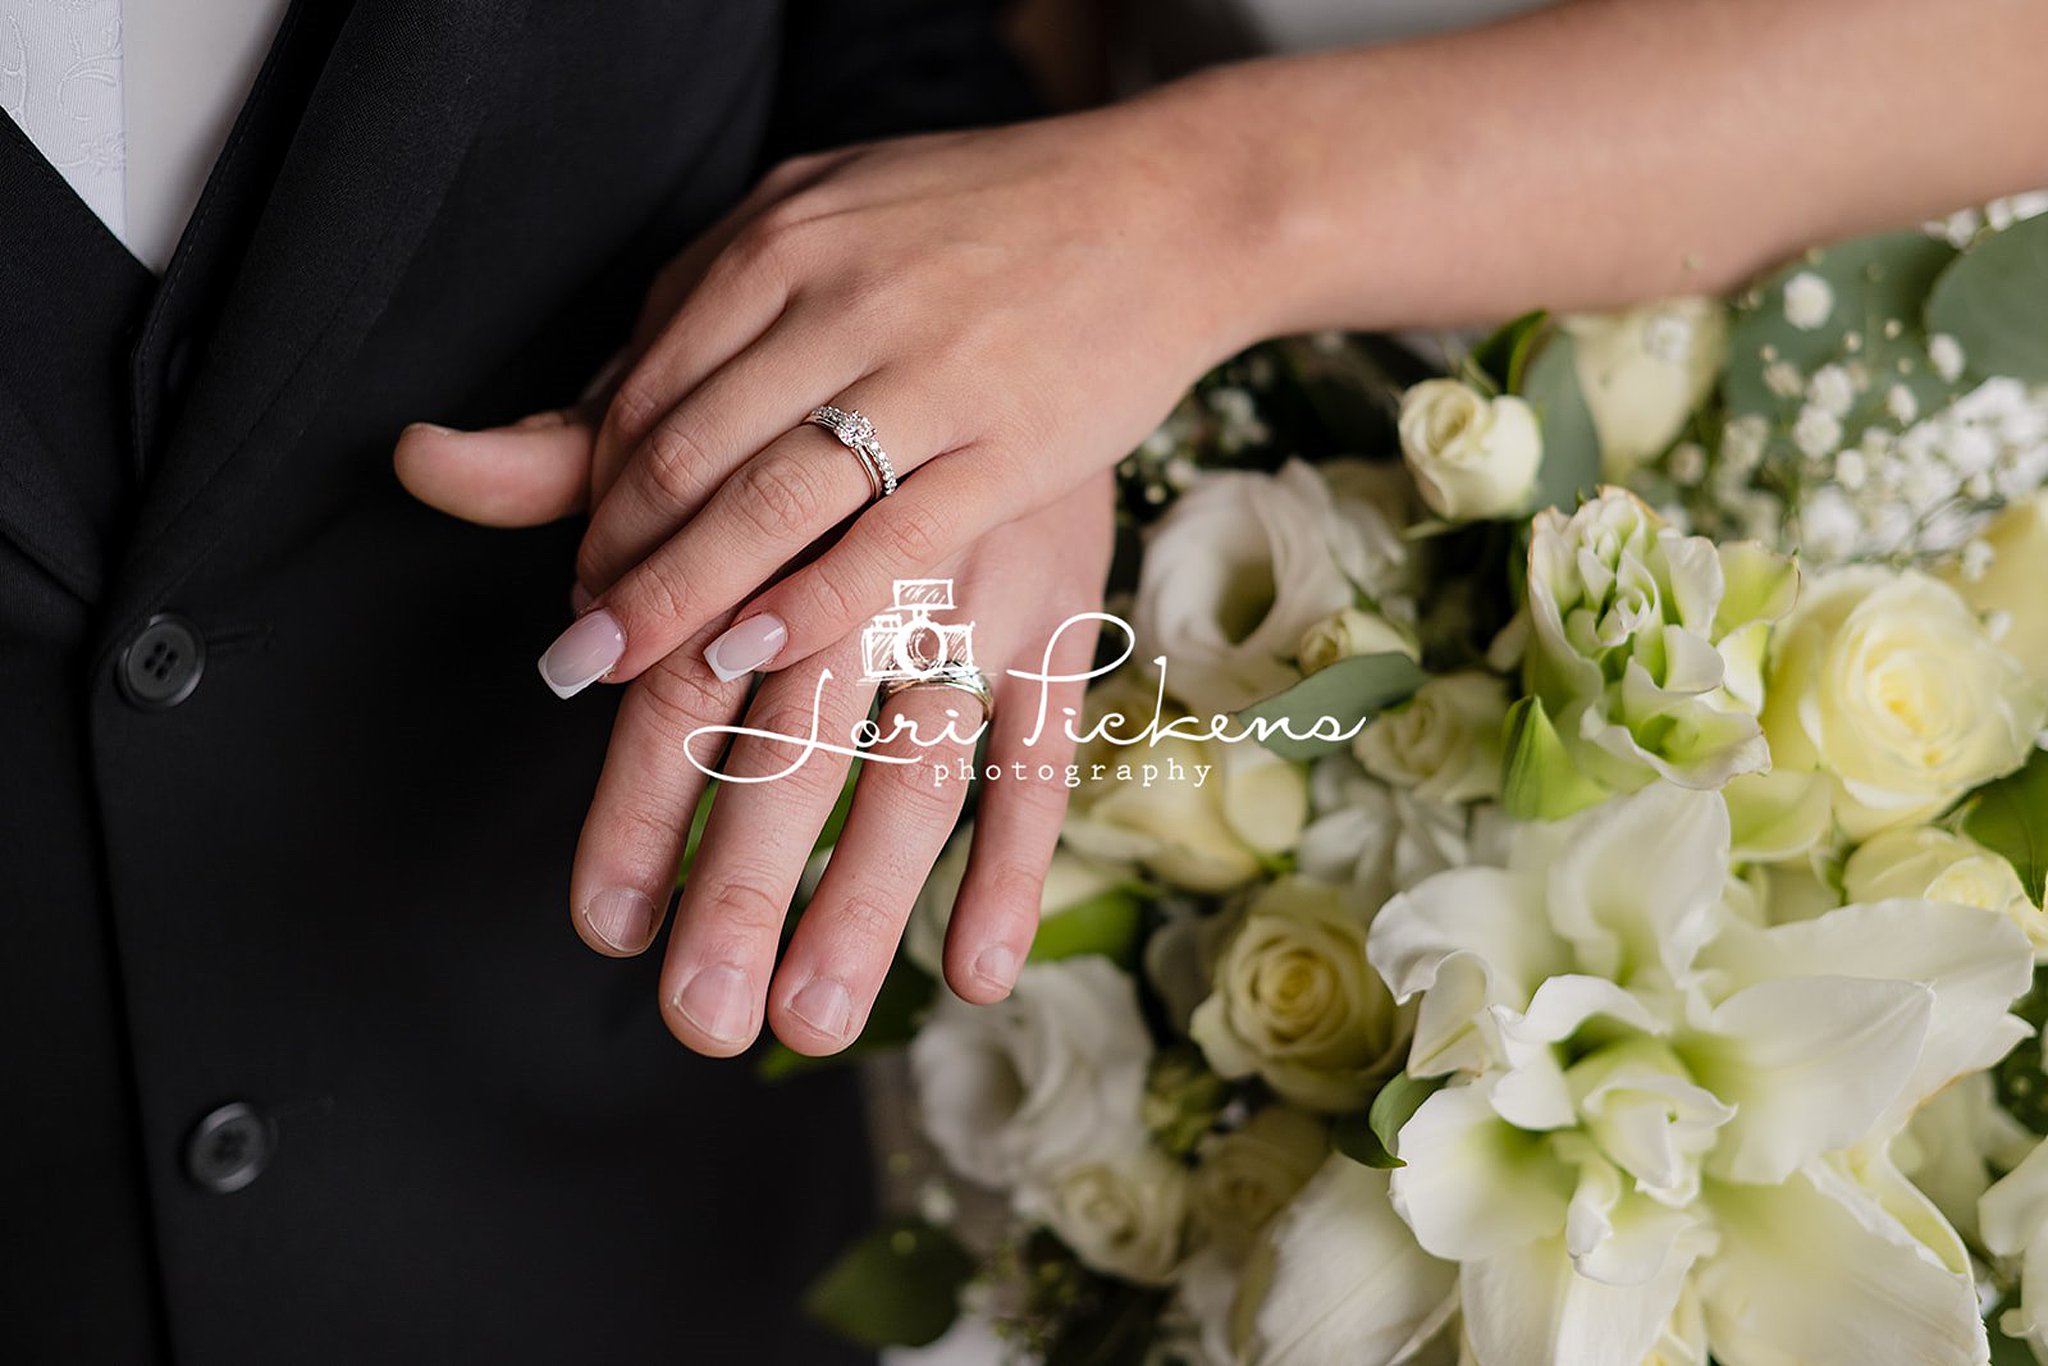 Details of newlywed's ring hands touching over a bouquet at one of the wedding venues west virginia